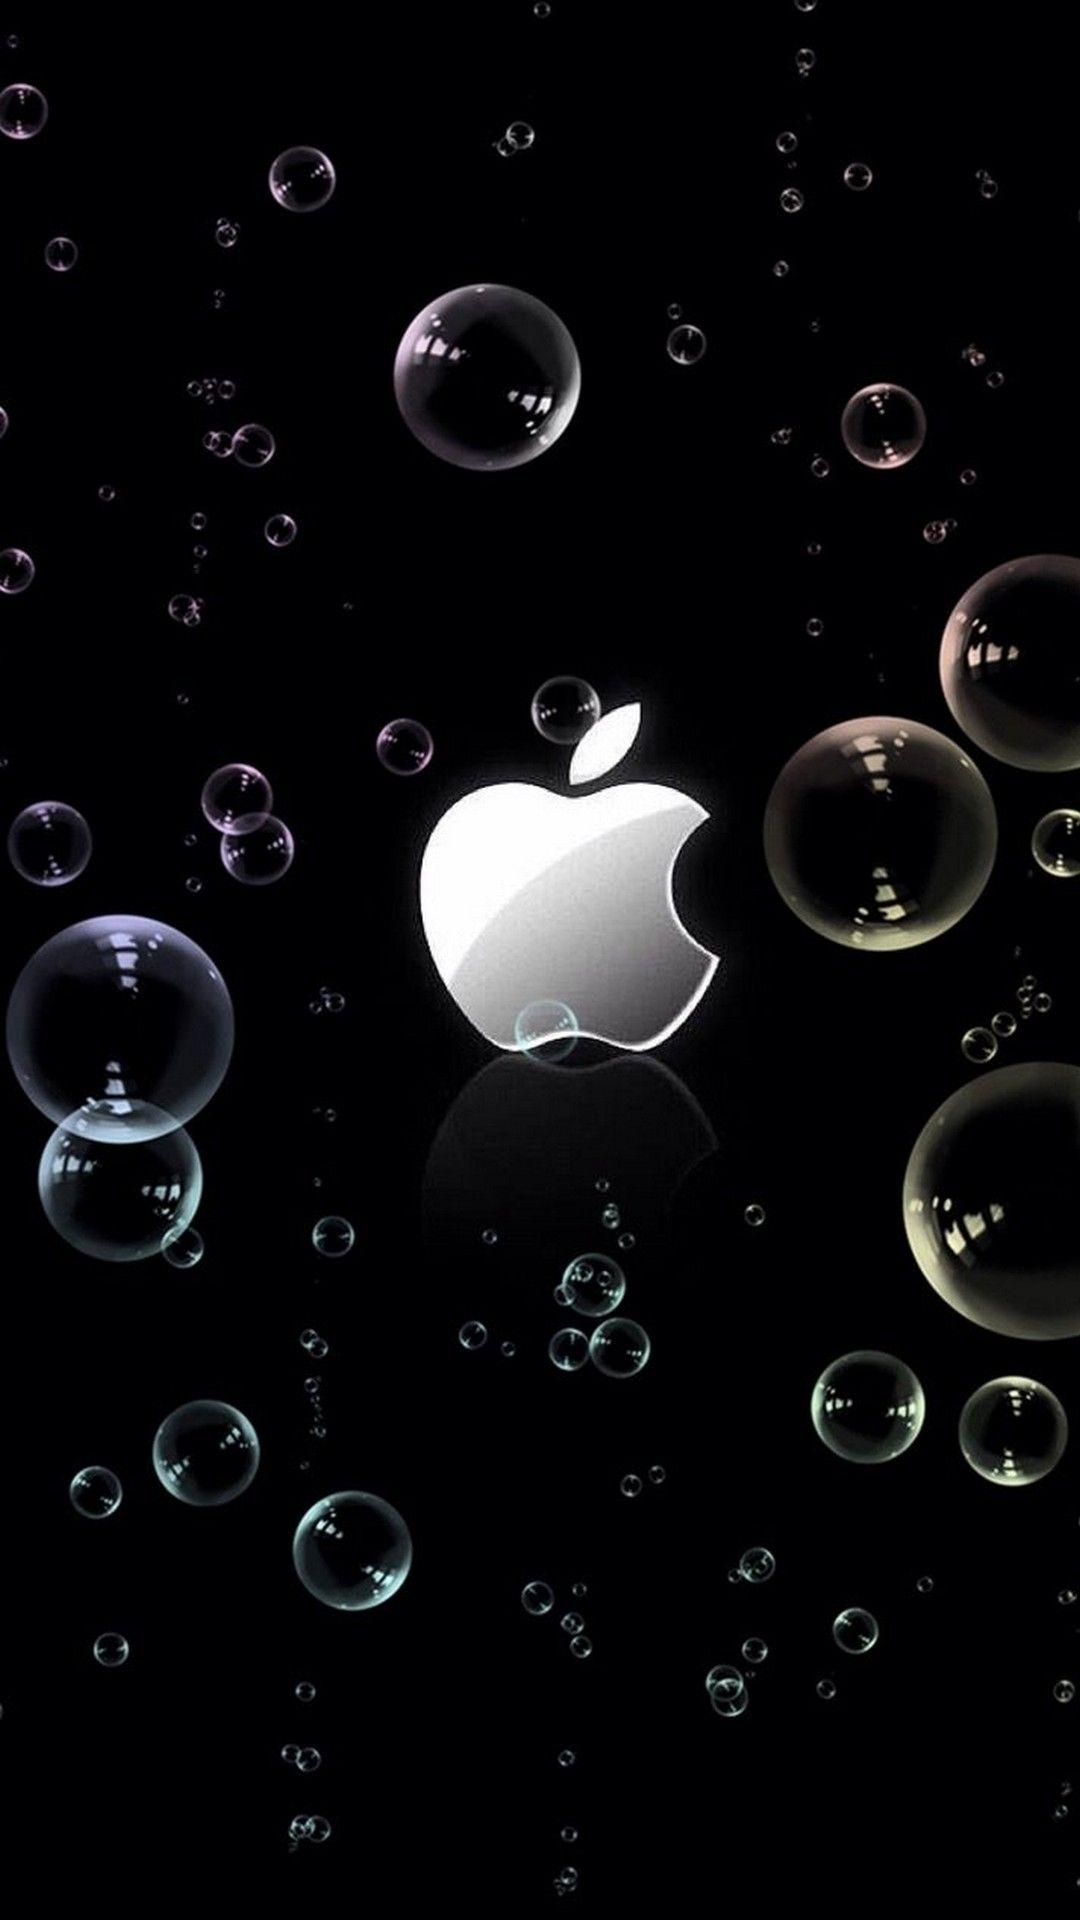 Download Apple Event Wallpapers From 2020 iPhone 12 Event Here  iOS Hacker